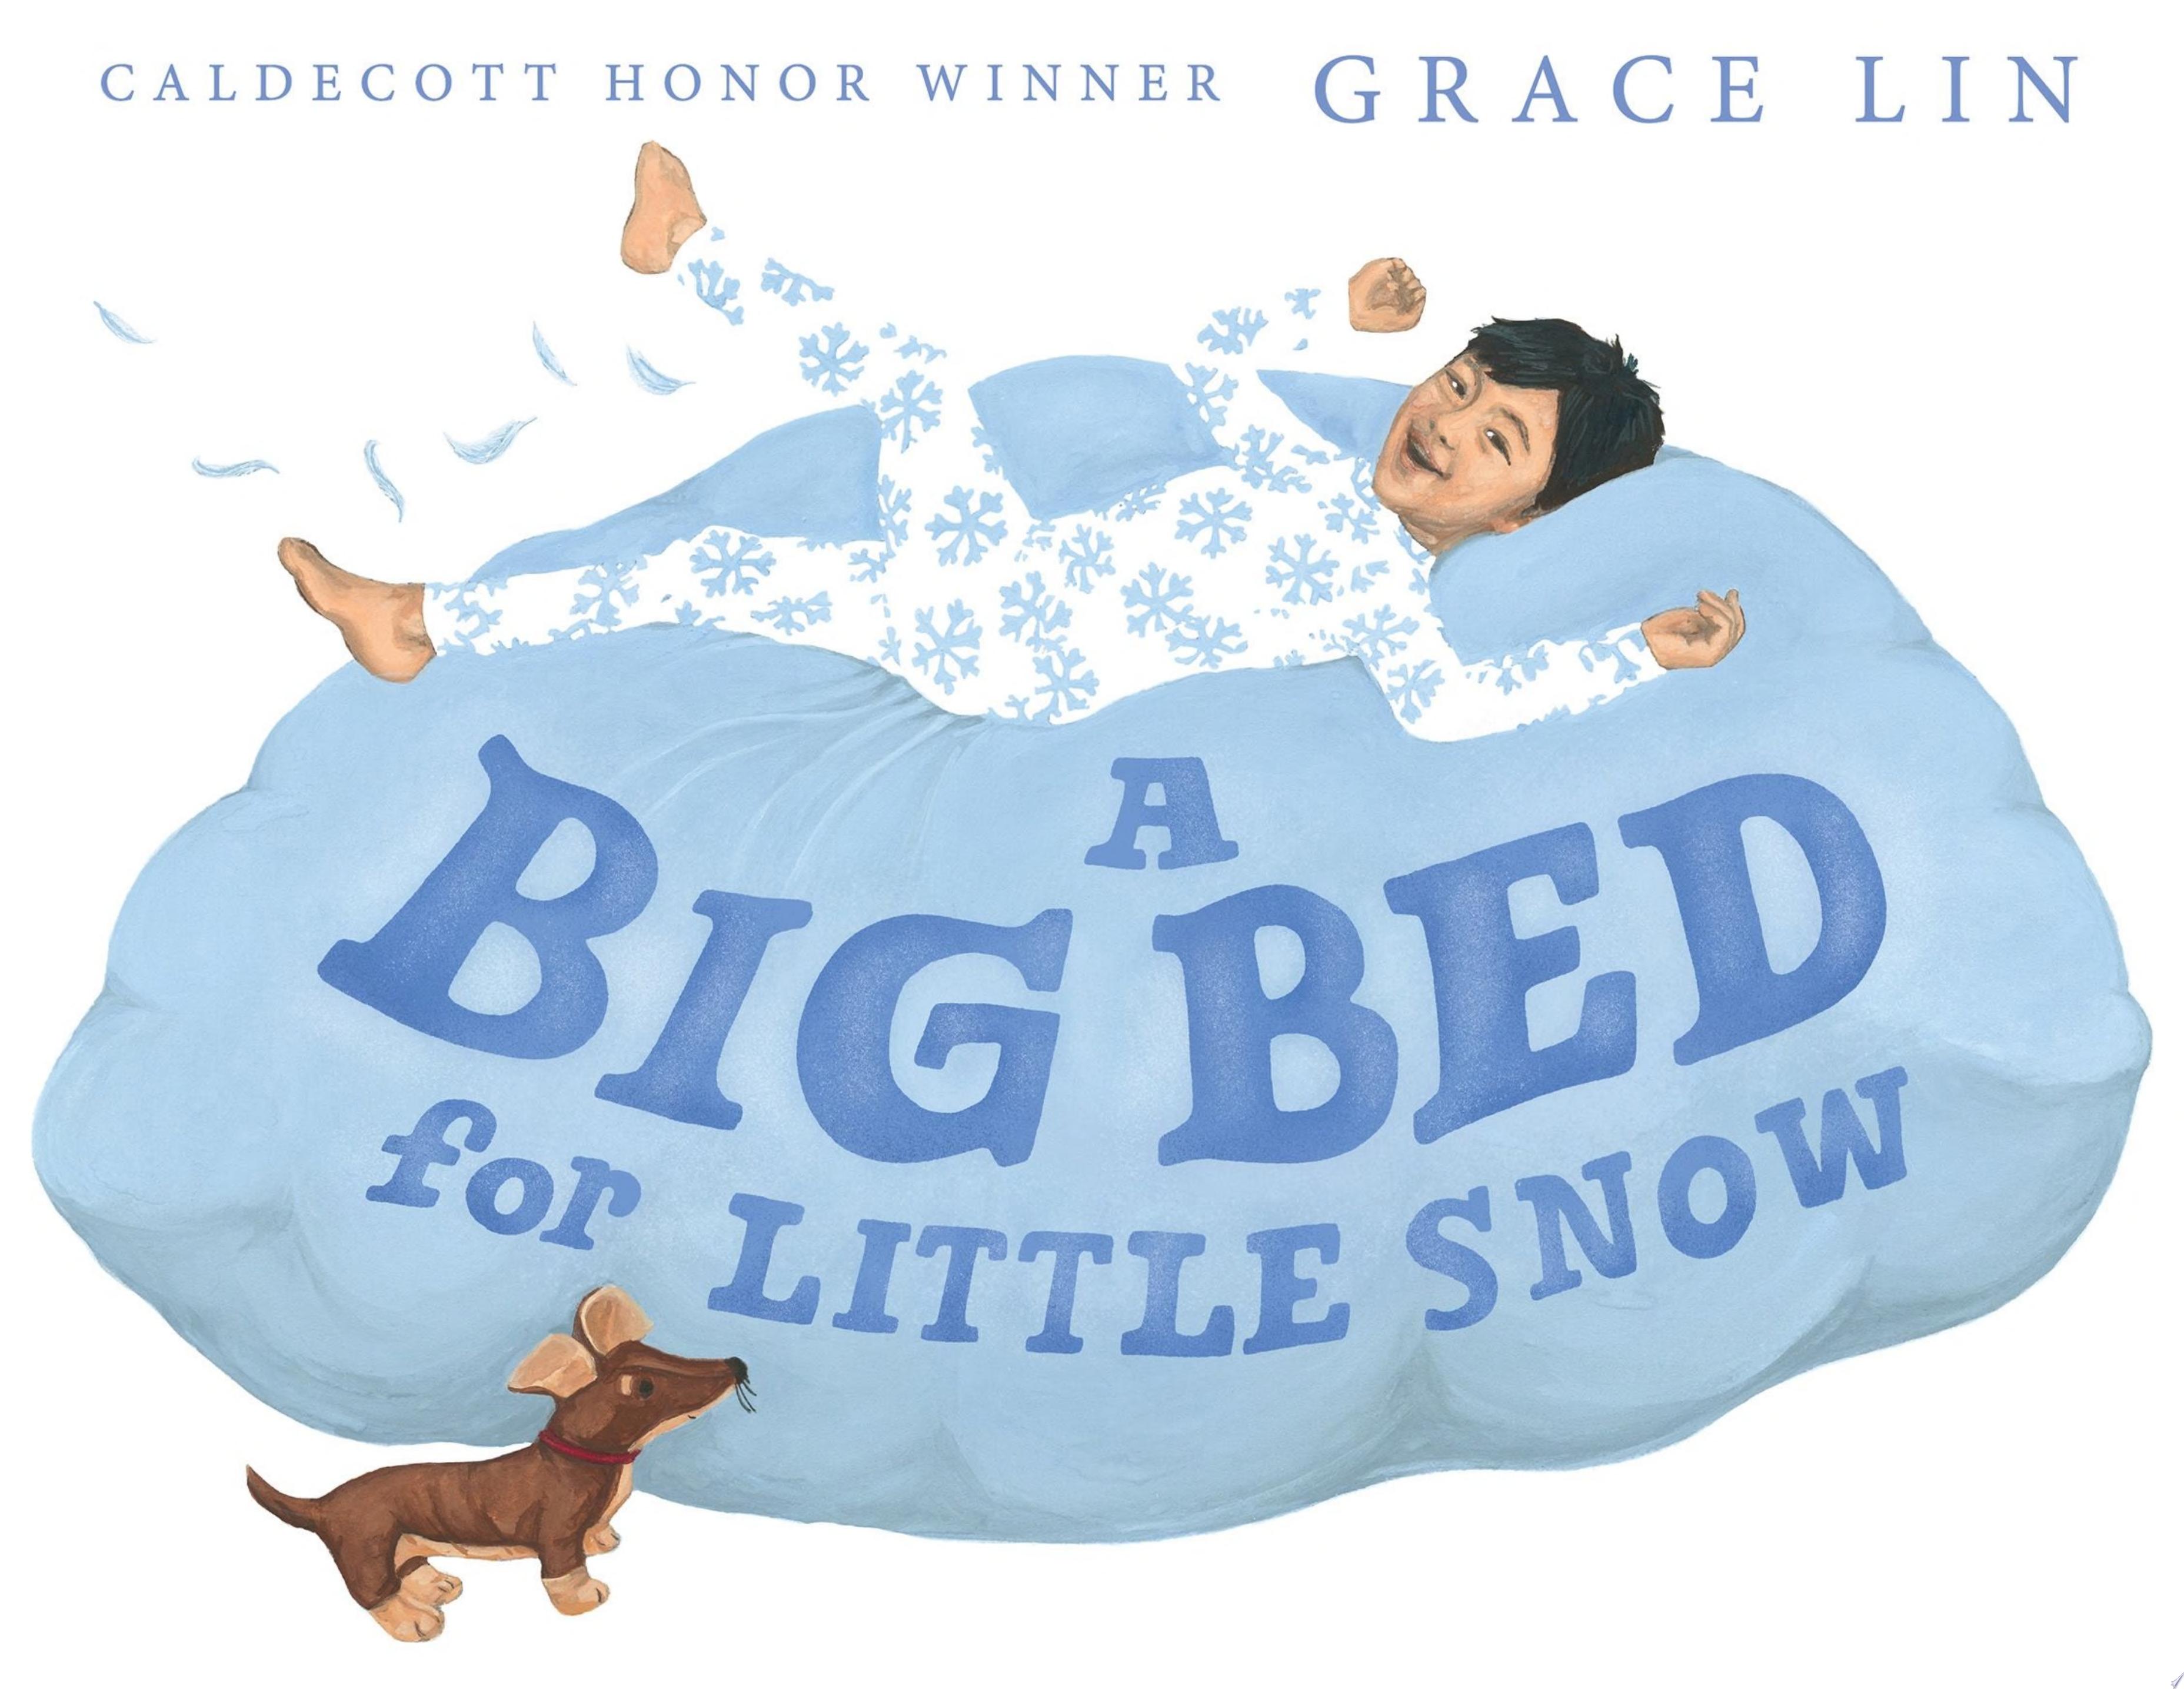 Image for "A Big Bed for Little Snow"